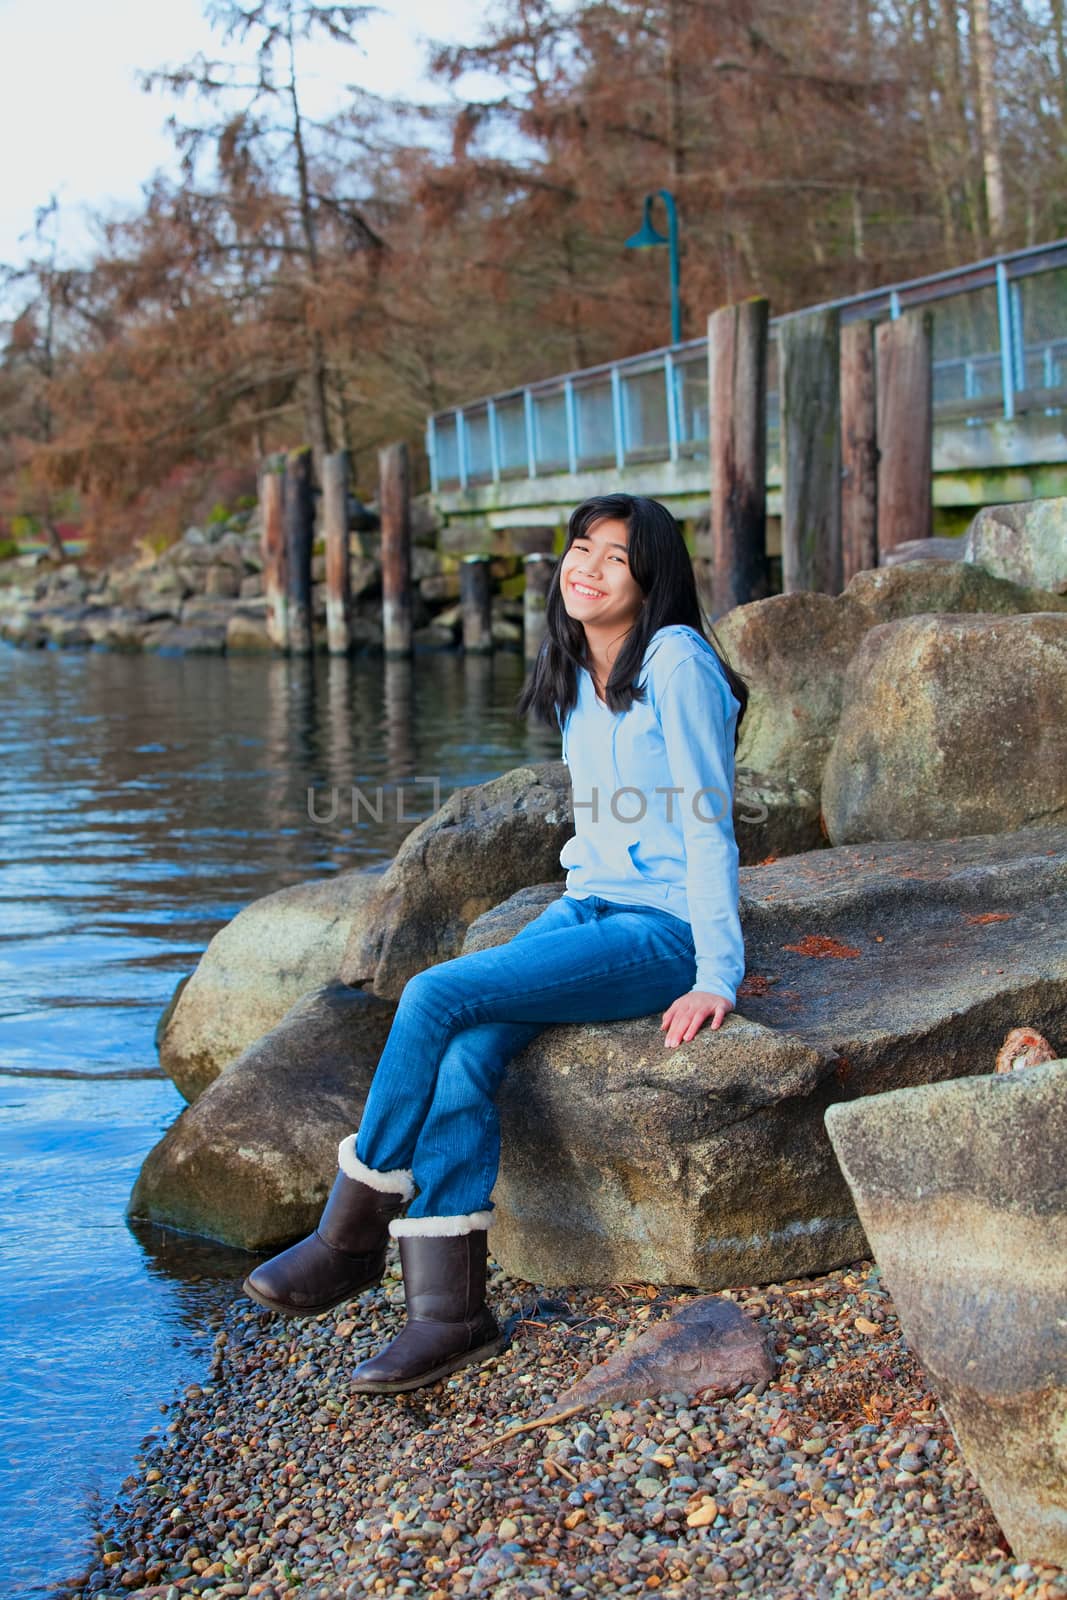 Young teen girl relaxing on large boulder along lake shore, smil by jarenwicklund